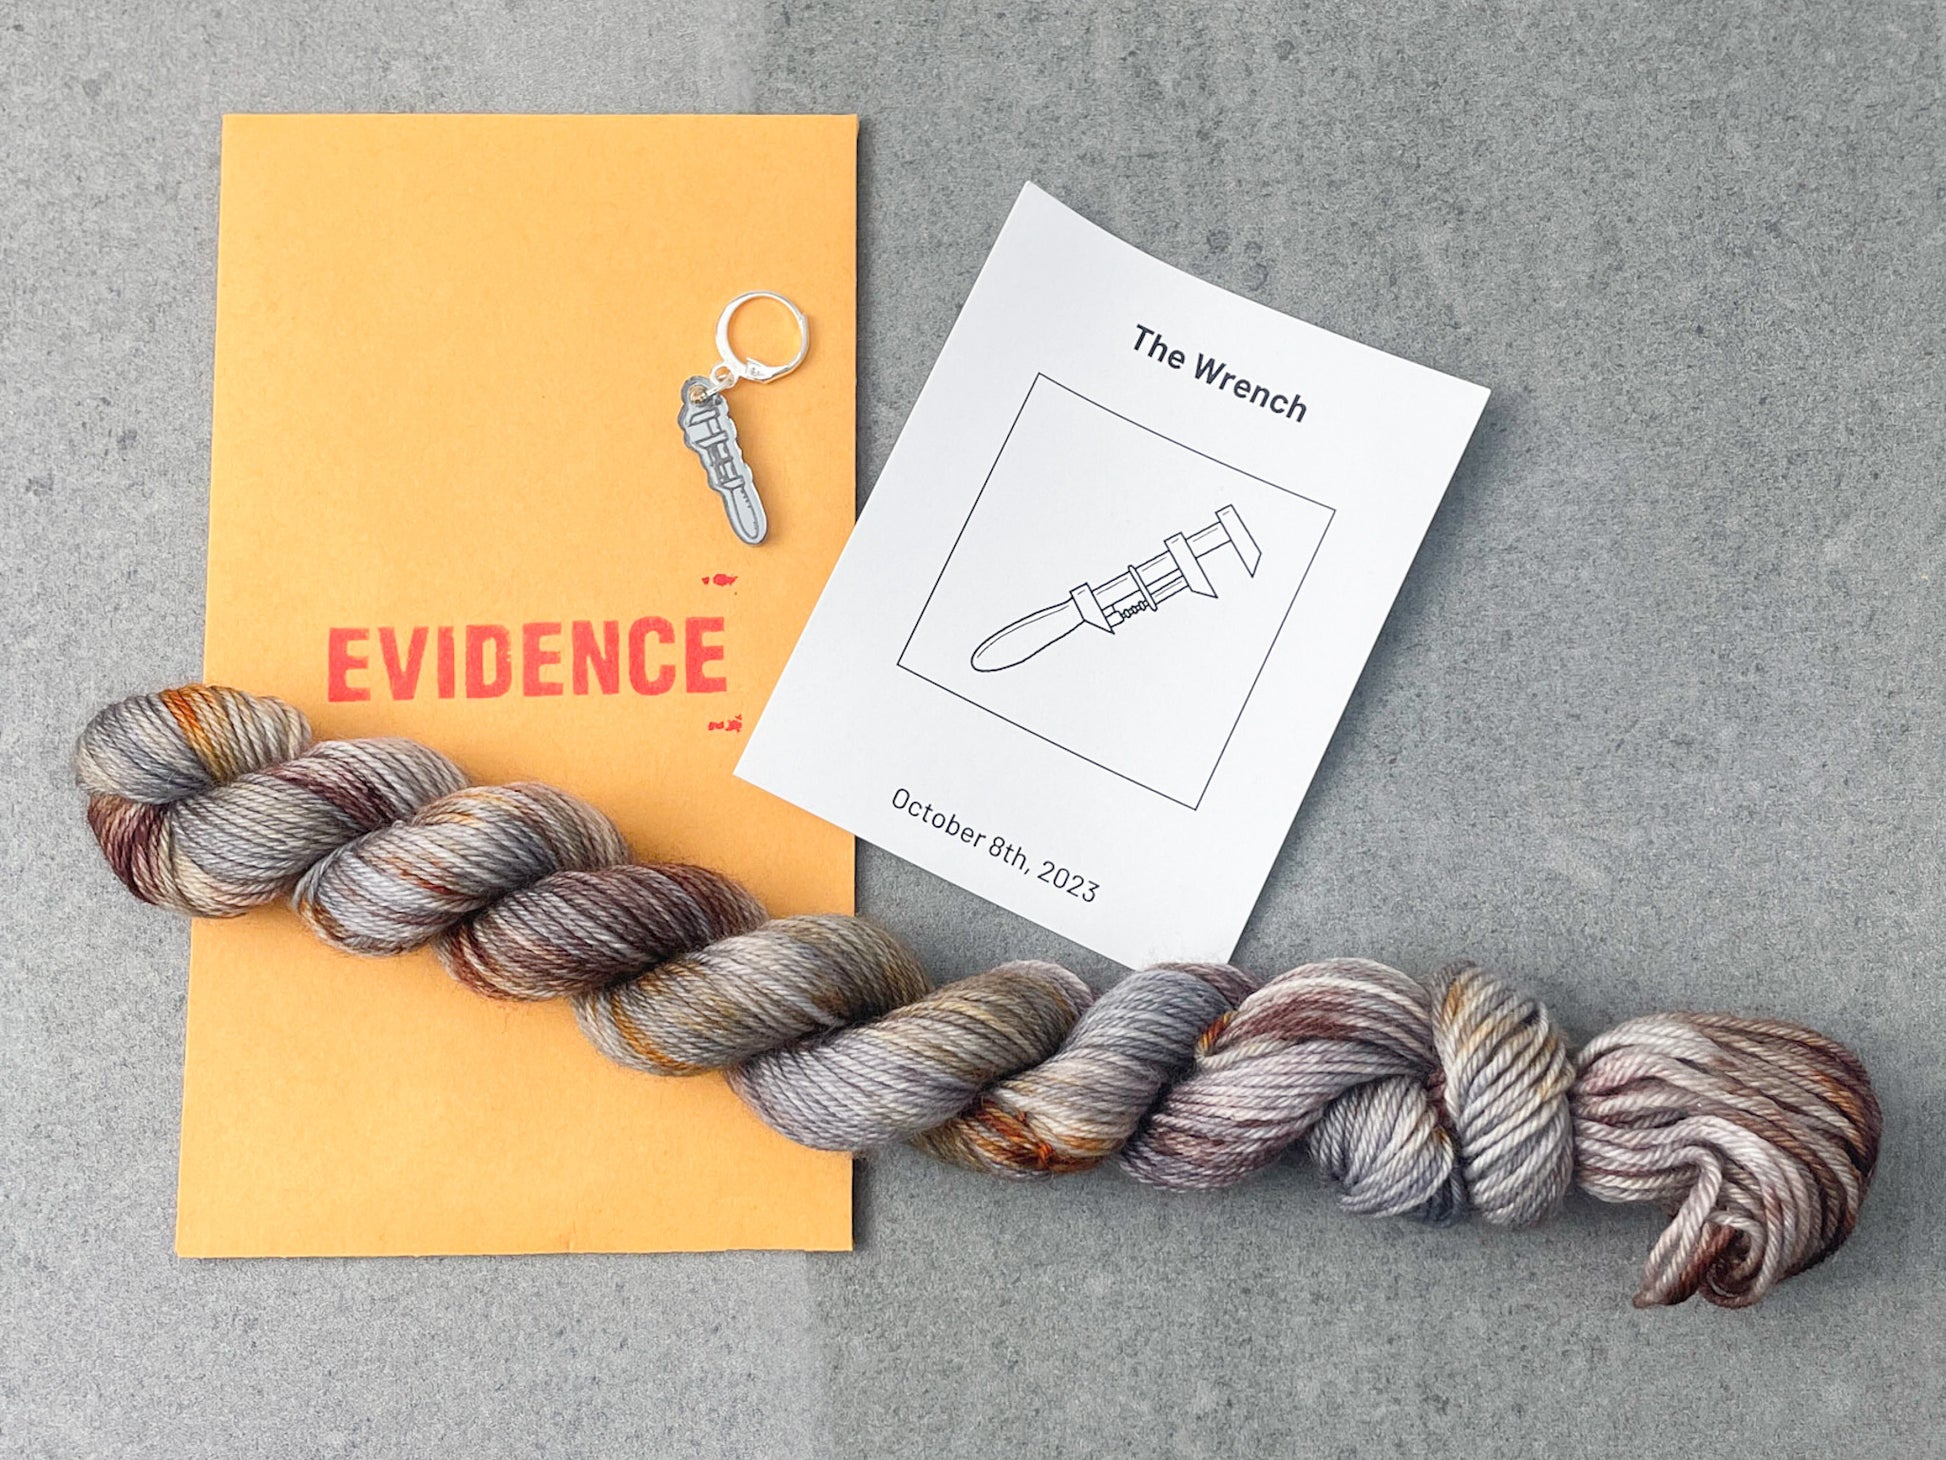 A silver-gray skein with rusty red and brown speckles on top of an envelope stamped with "Evidence" and a card with a drawing of a wrench on it.